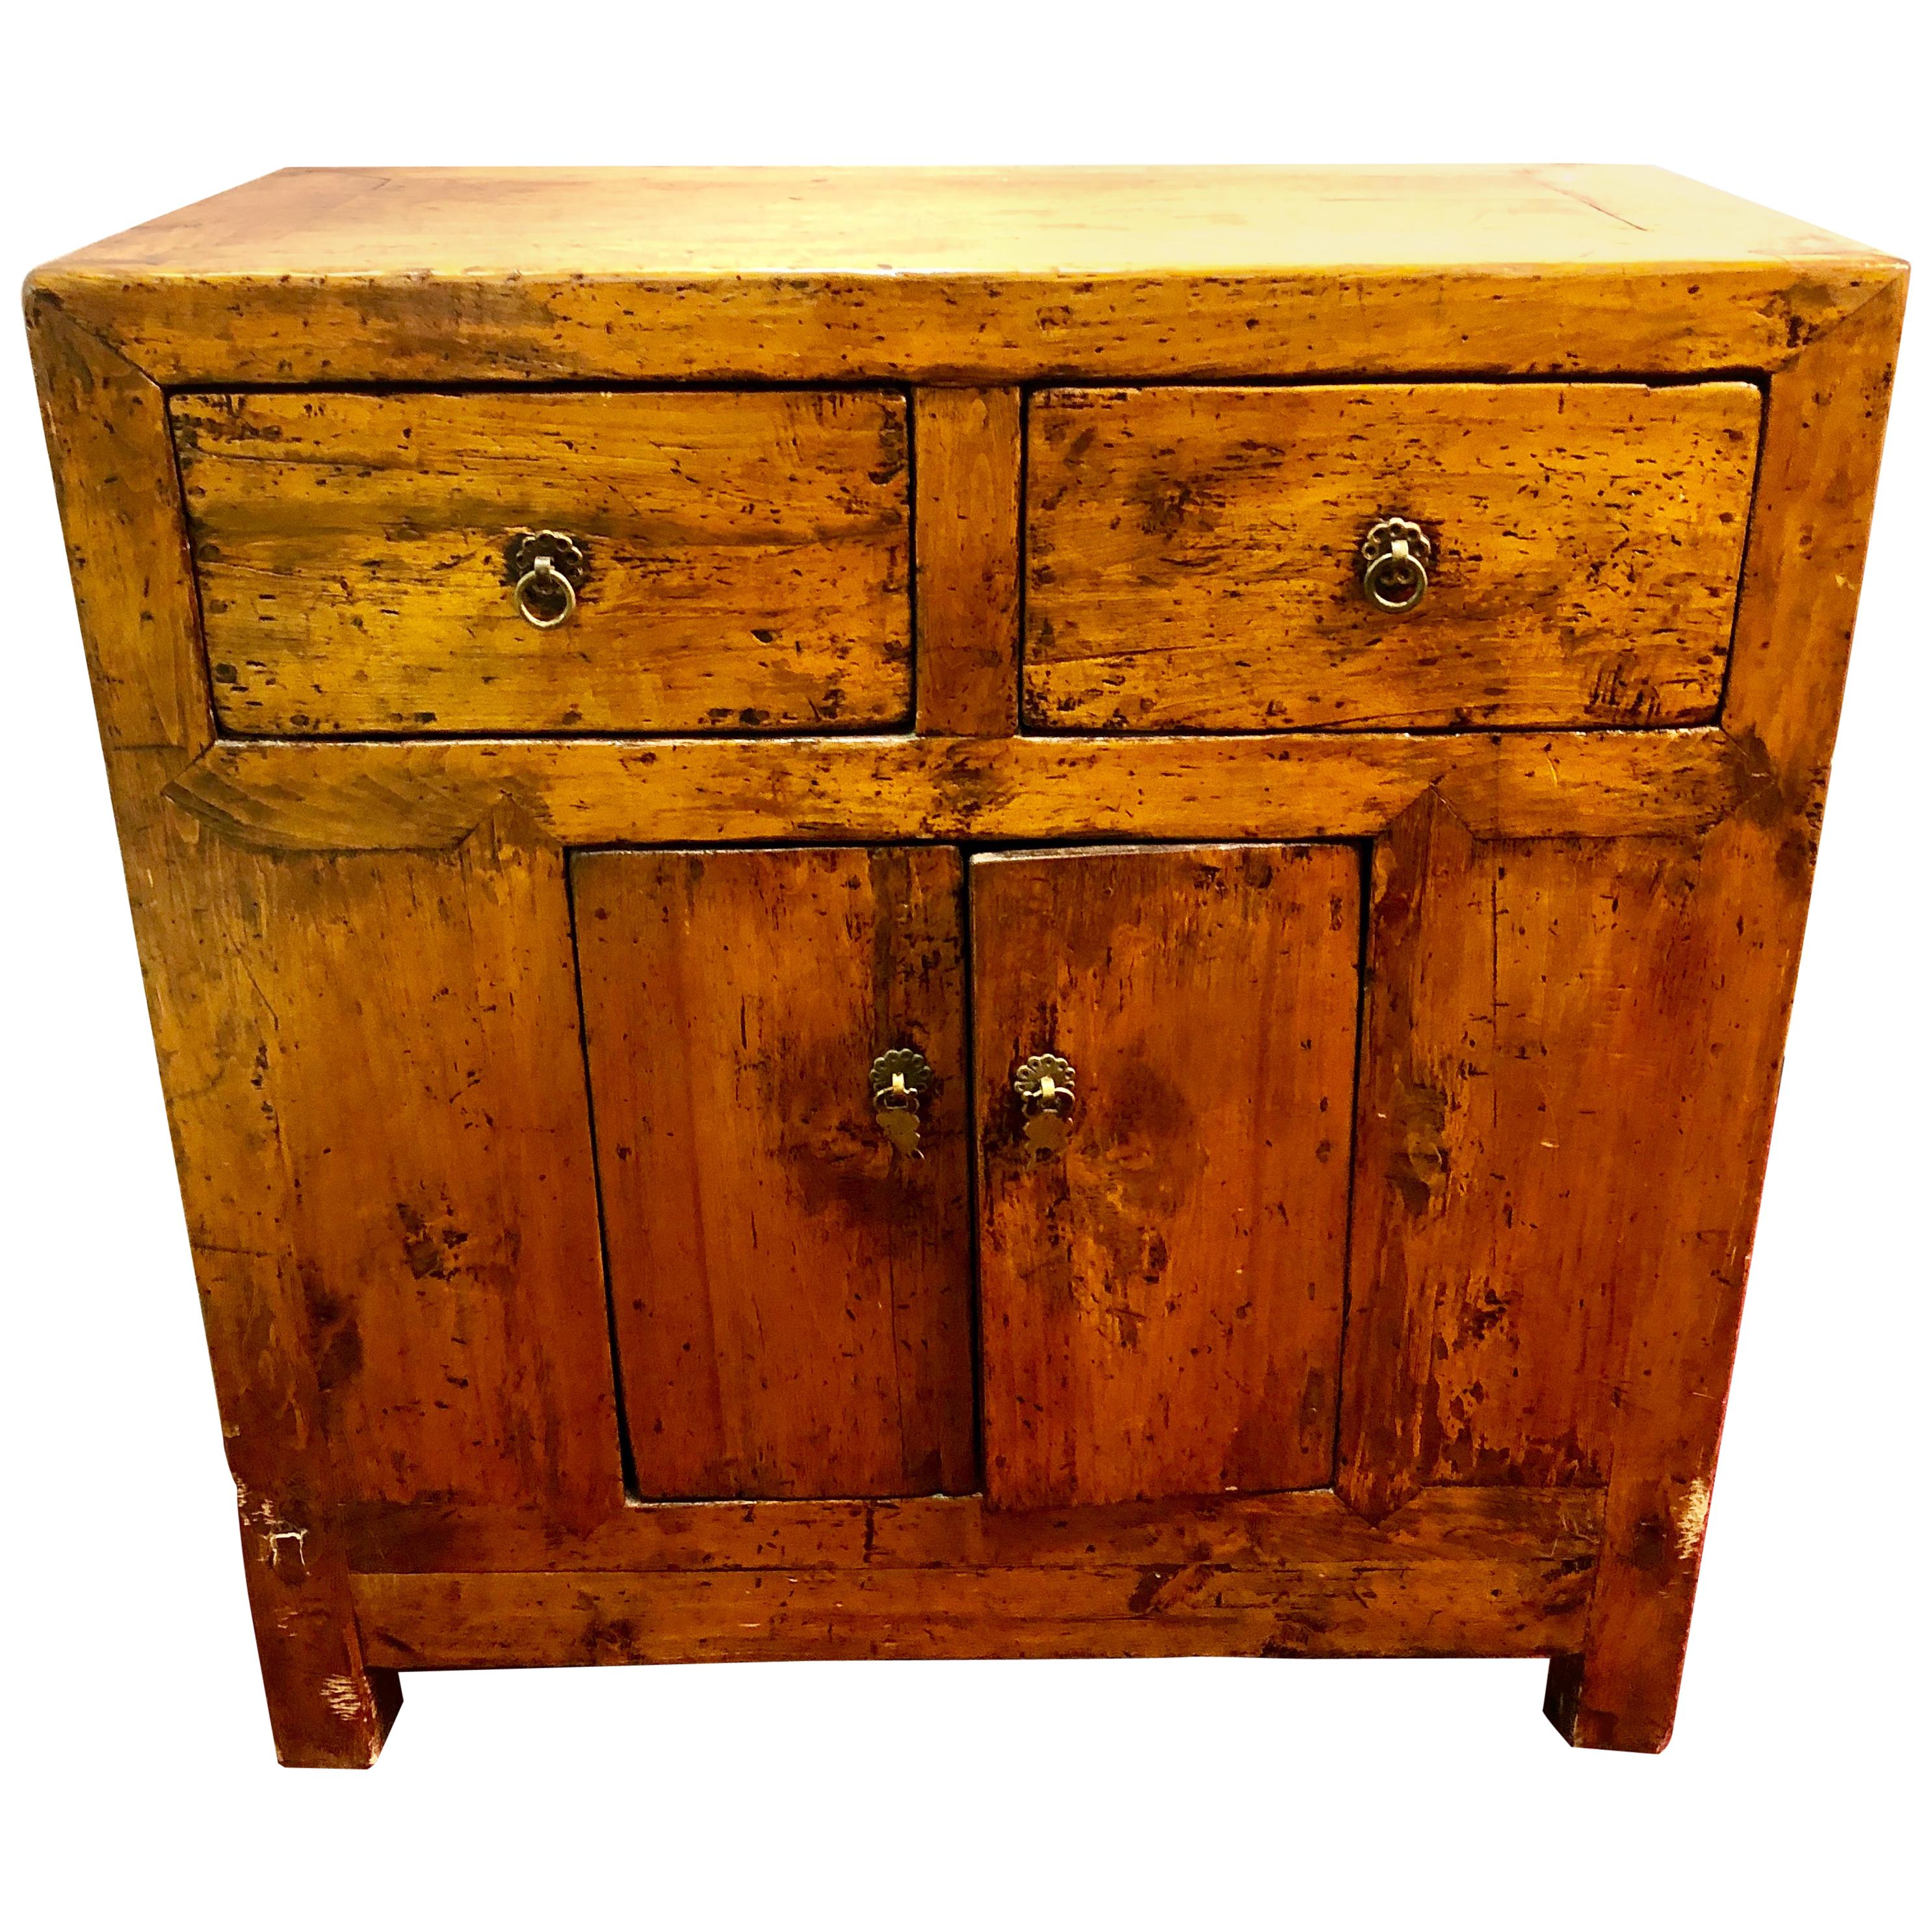 19th Century Two over Two Small Chest of Drawers or Nightstand